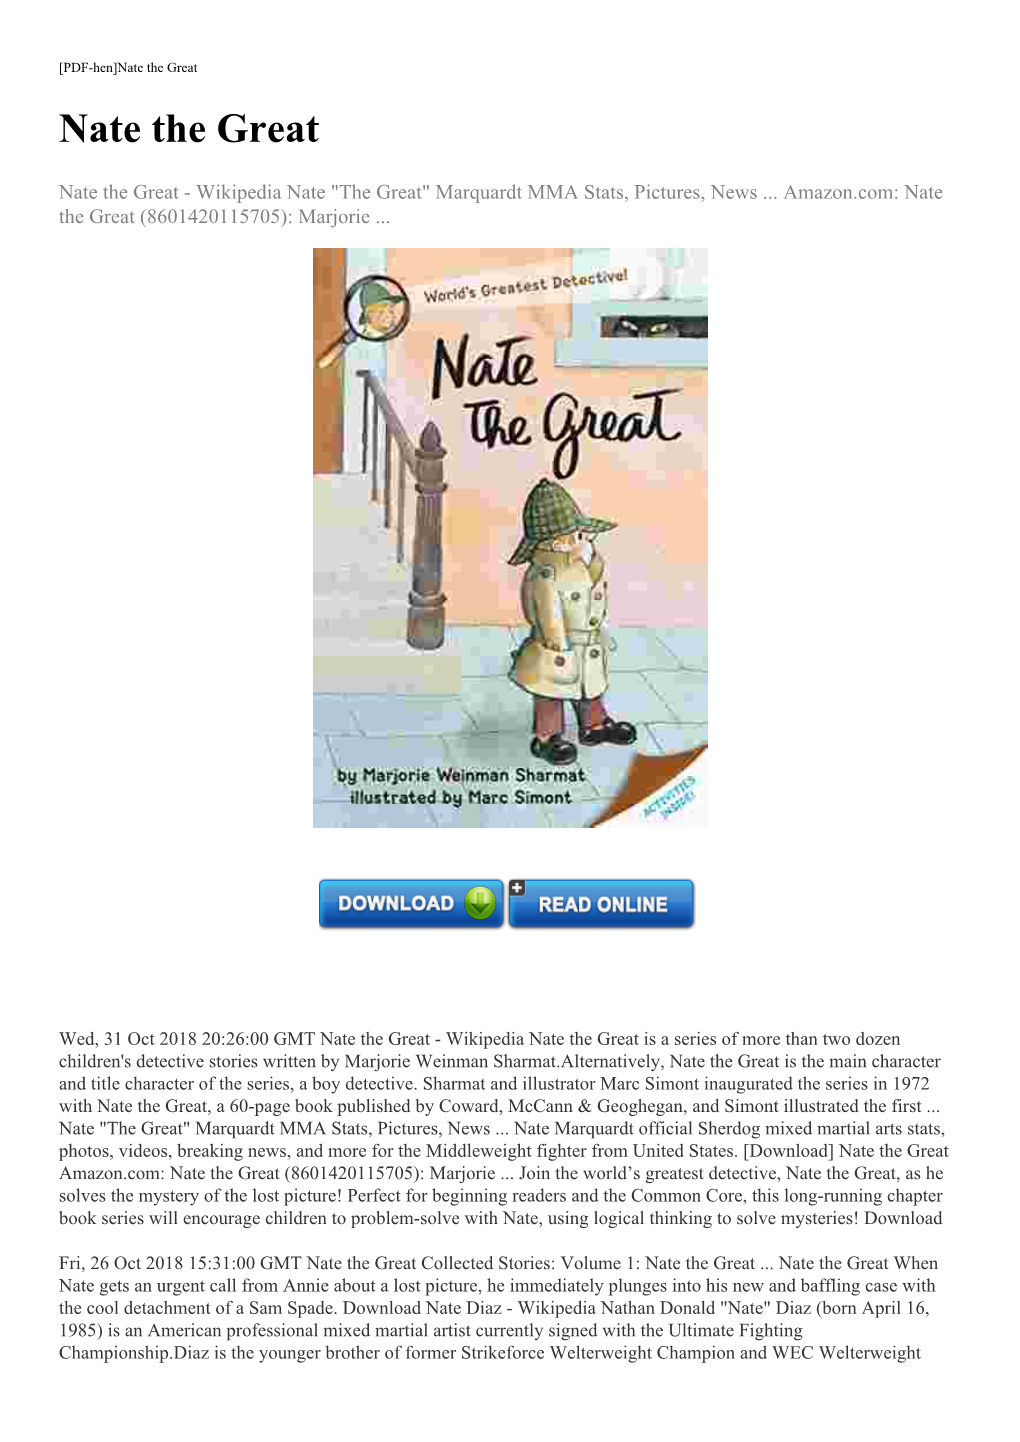 [Download] Nate the Great Amazon.Com: Nate the Great (8601420115705): Marjorie